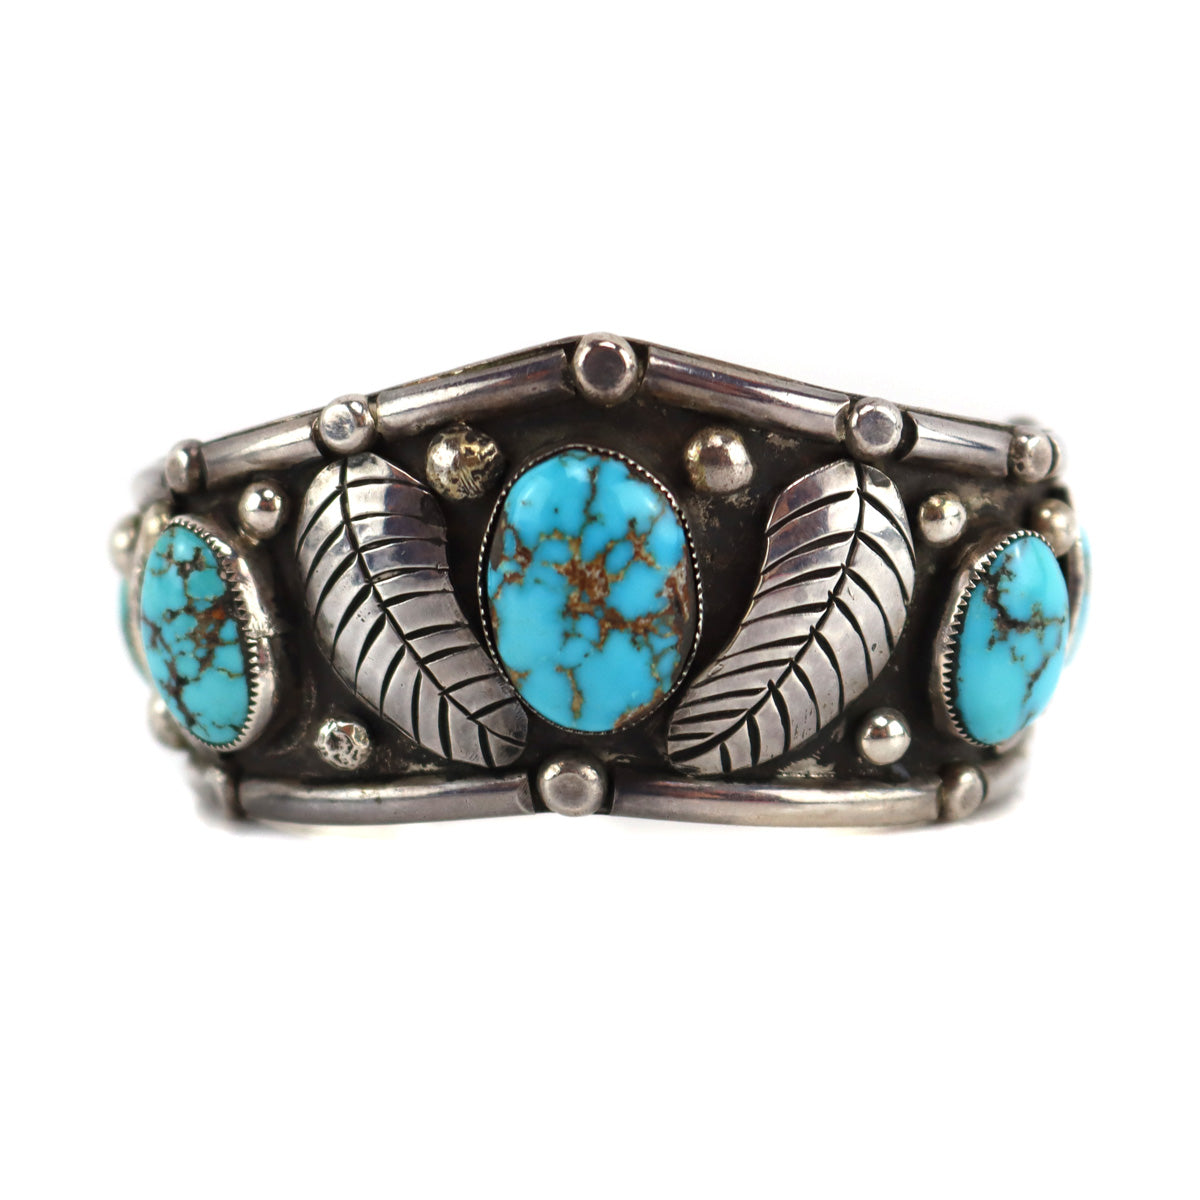 Navajo - Natural Turquoise Stones and Silver Bracelet with Feather Design c. 1960s, size 6 (J16023)